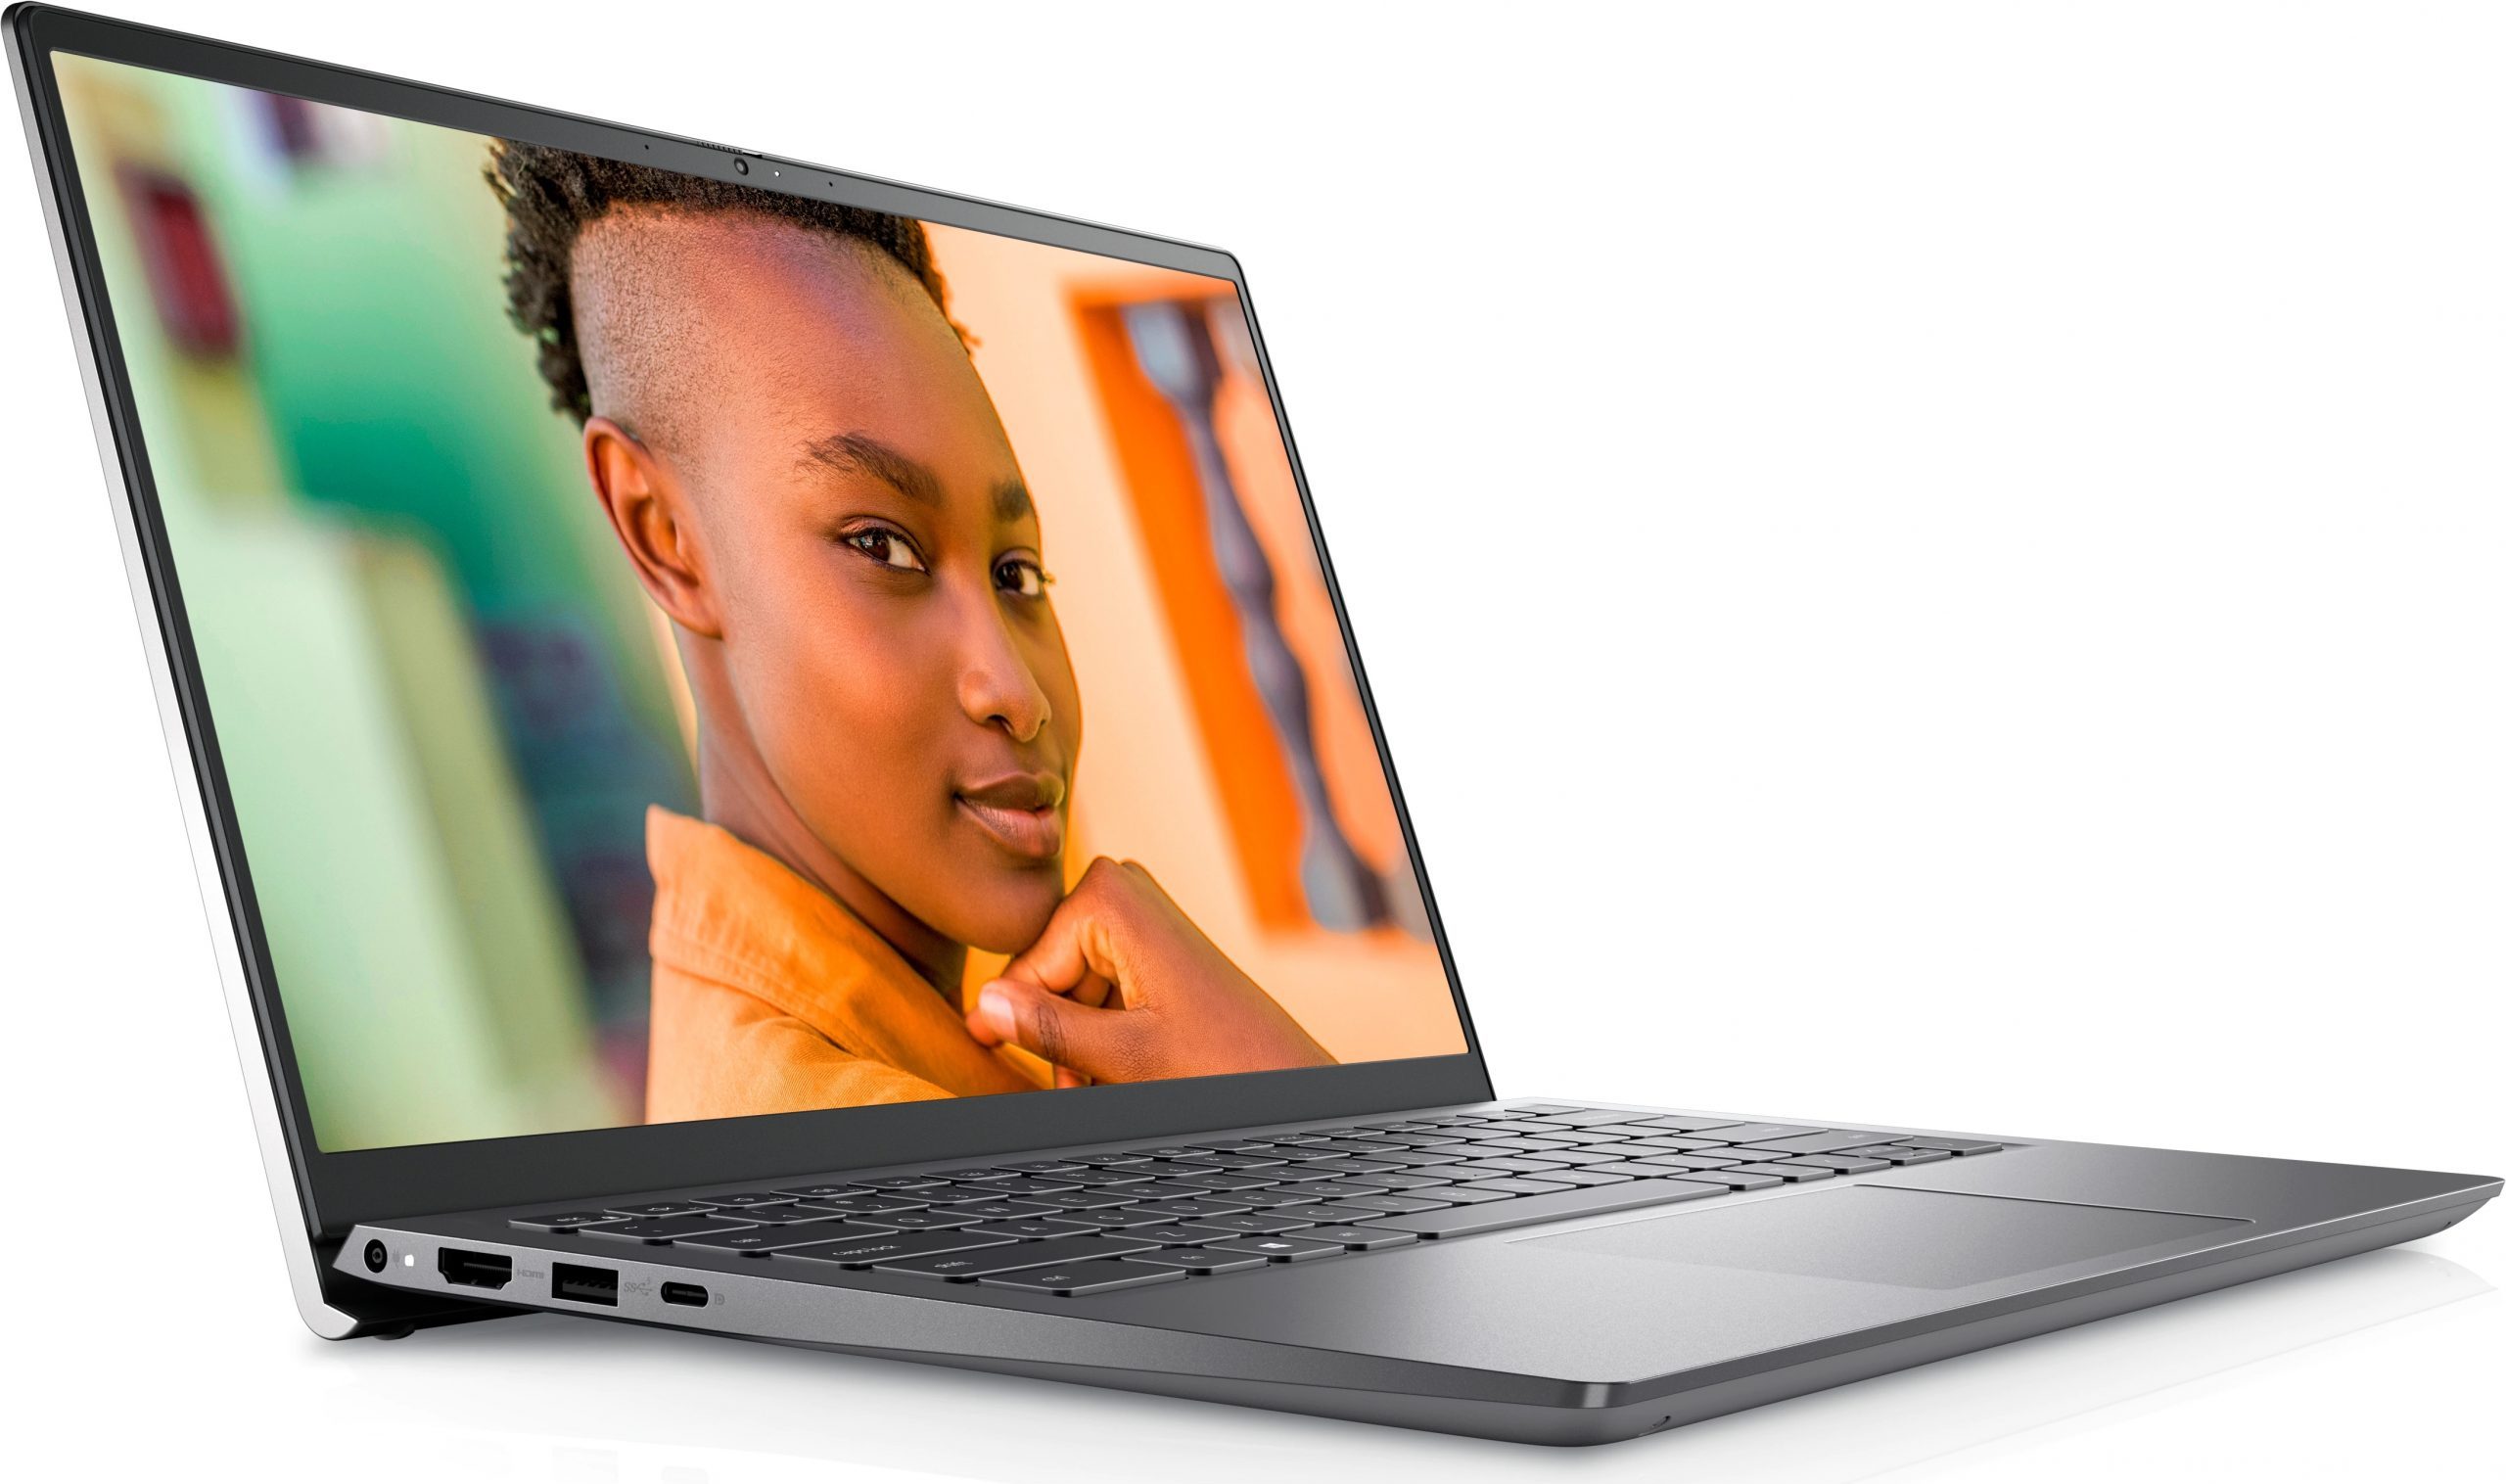 Dell Inspiron 14 5415 - Specs, Tests, and Prices | LaptopMedia.com